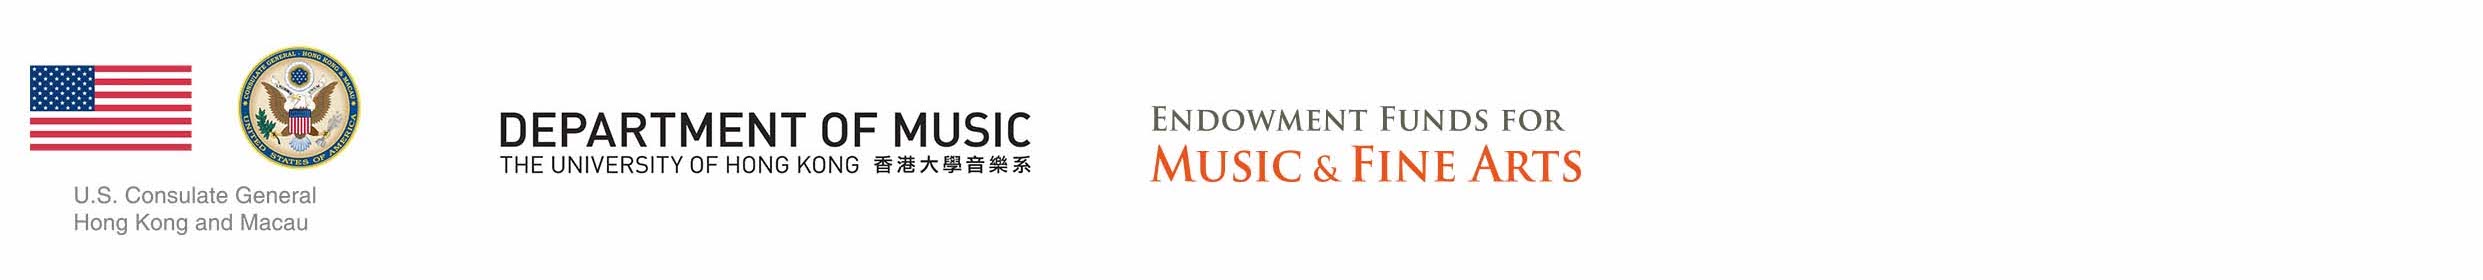 US Consulate｜Department of Music, HKU｜Endowment Fund